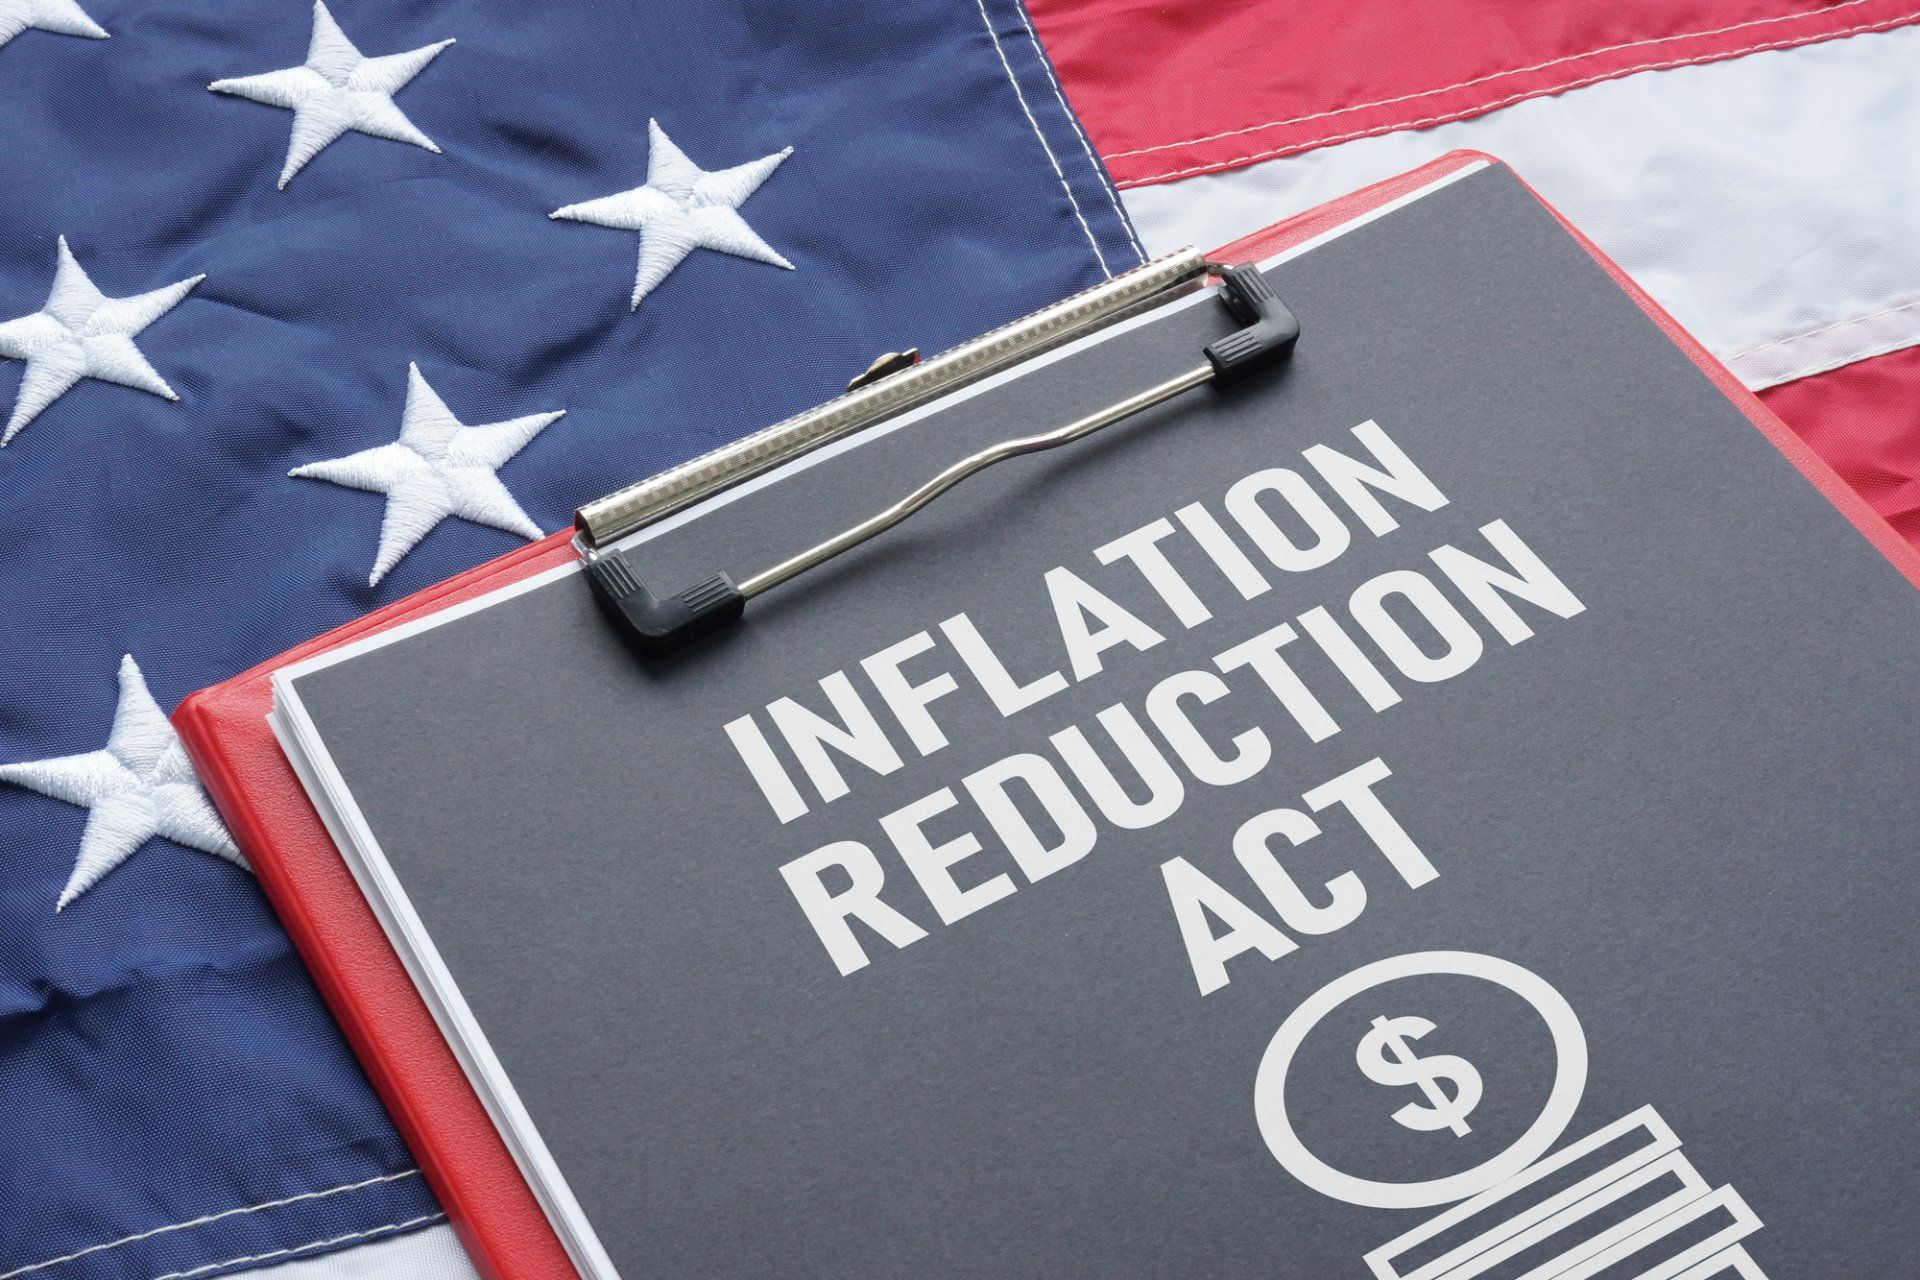 Inflation Tax Credit